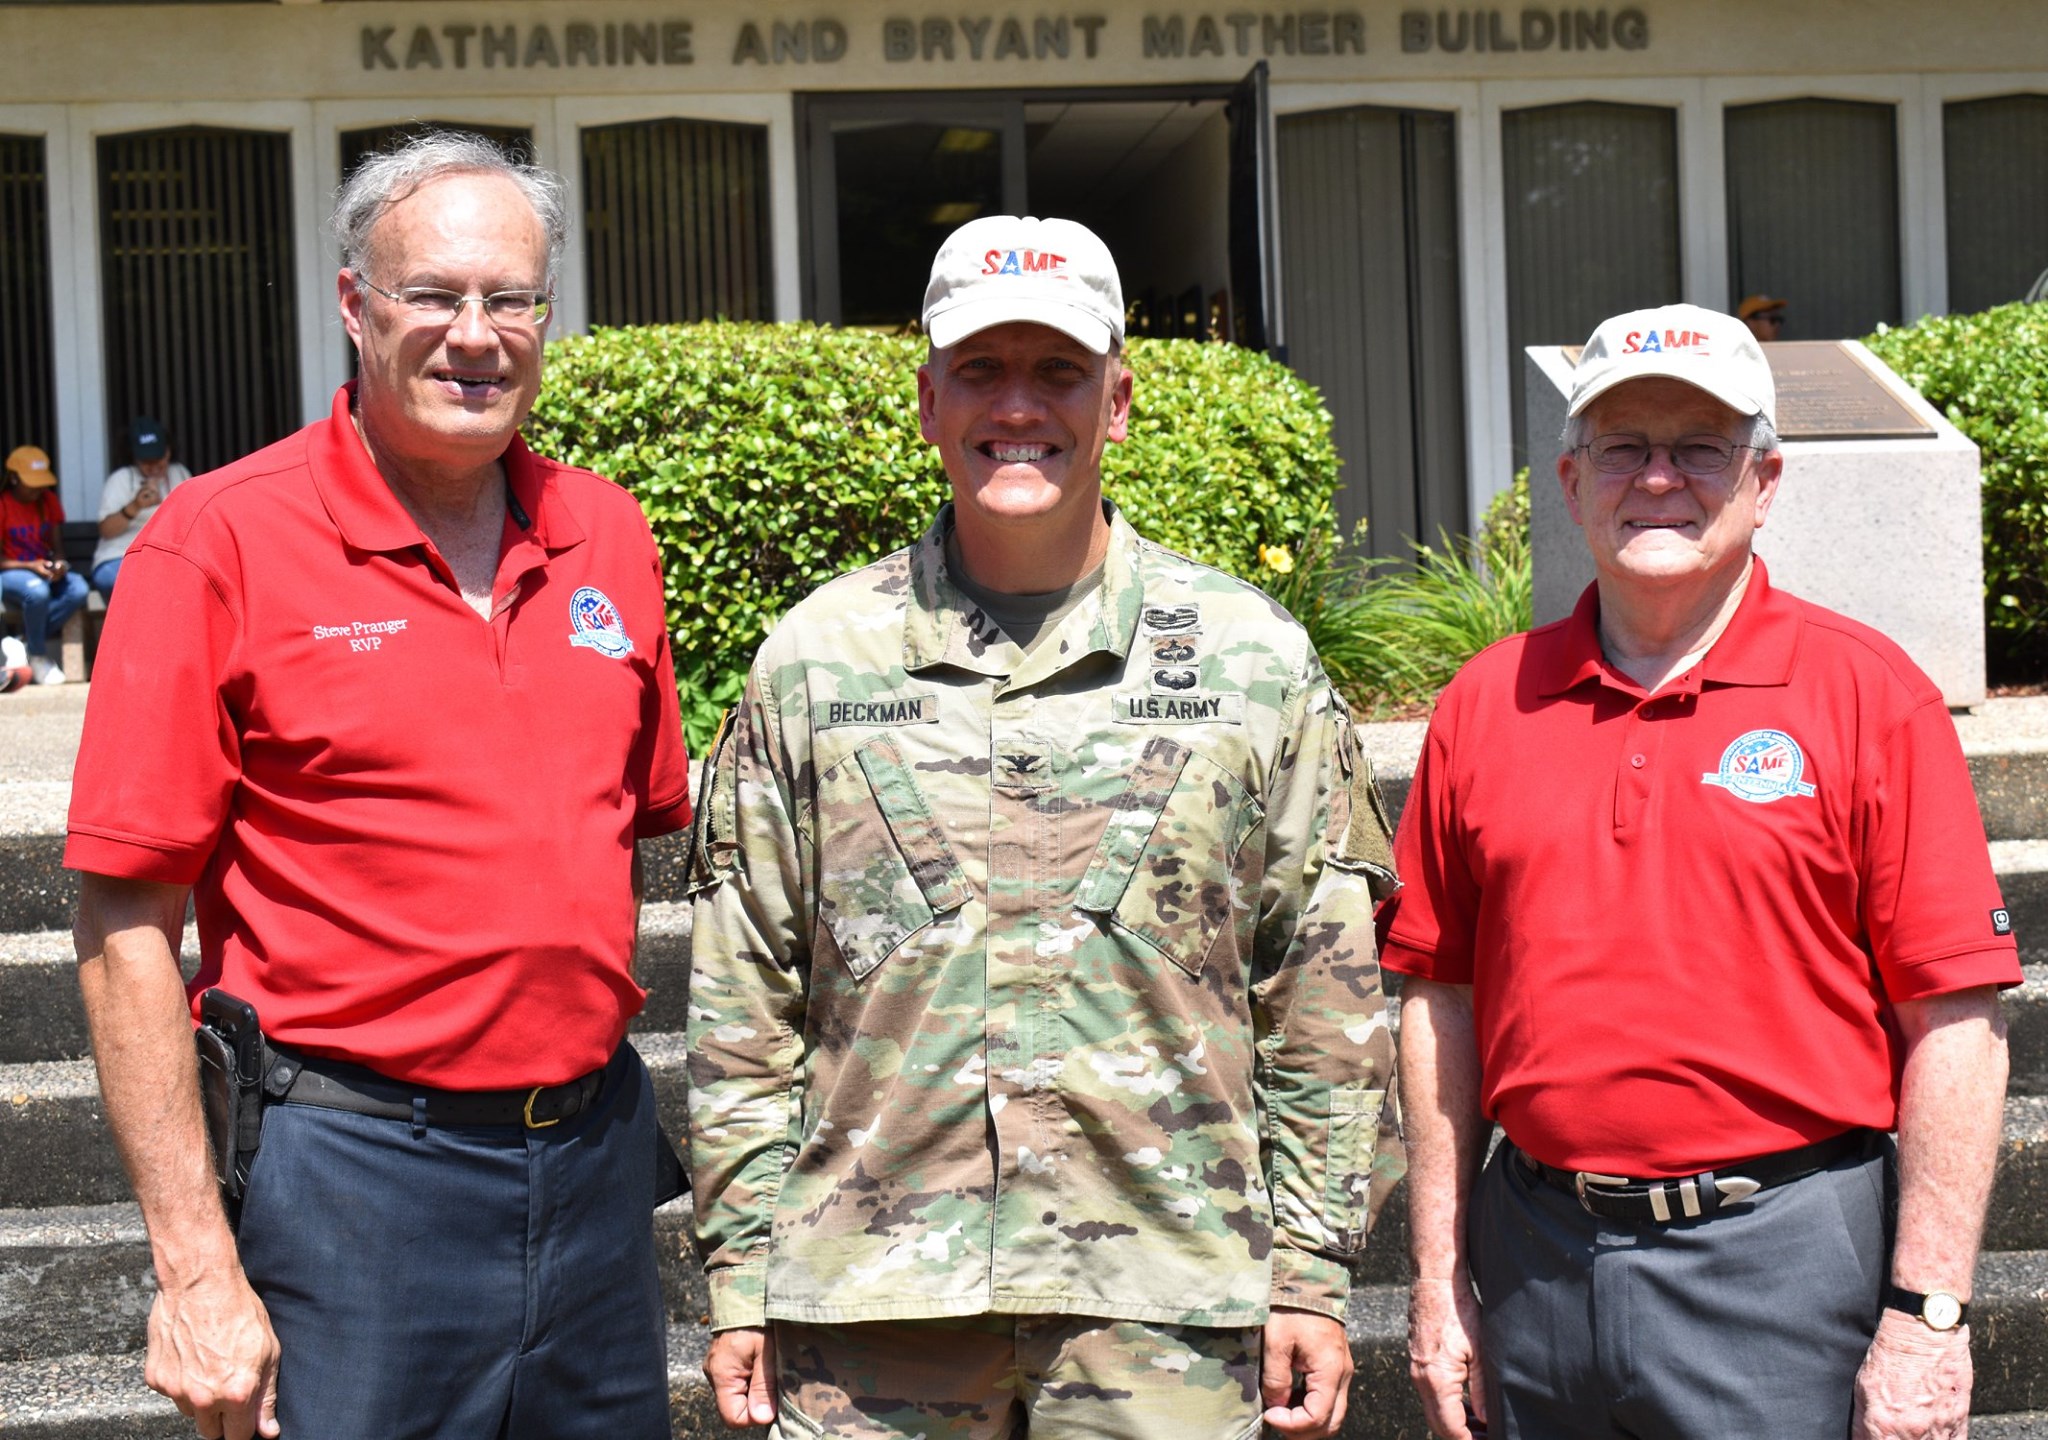 SAME President Buddy Barnes (right) visiting the SAME/Army Engineering & Construction Camp in 2019.